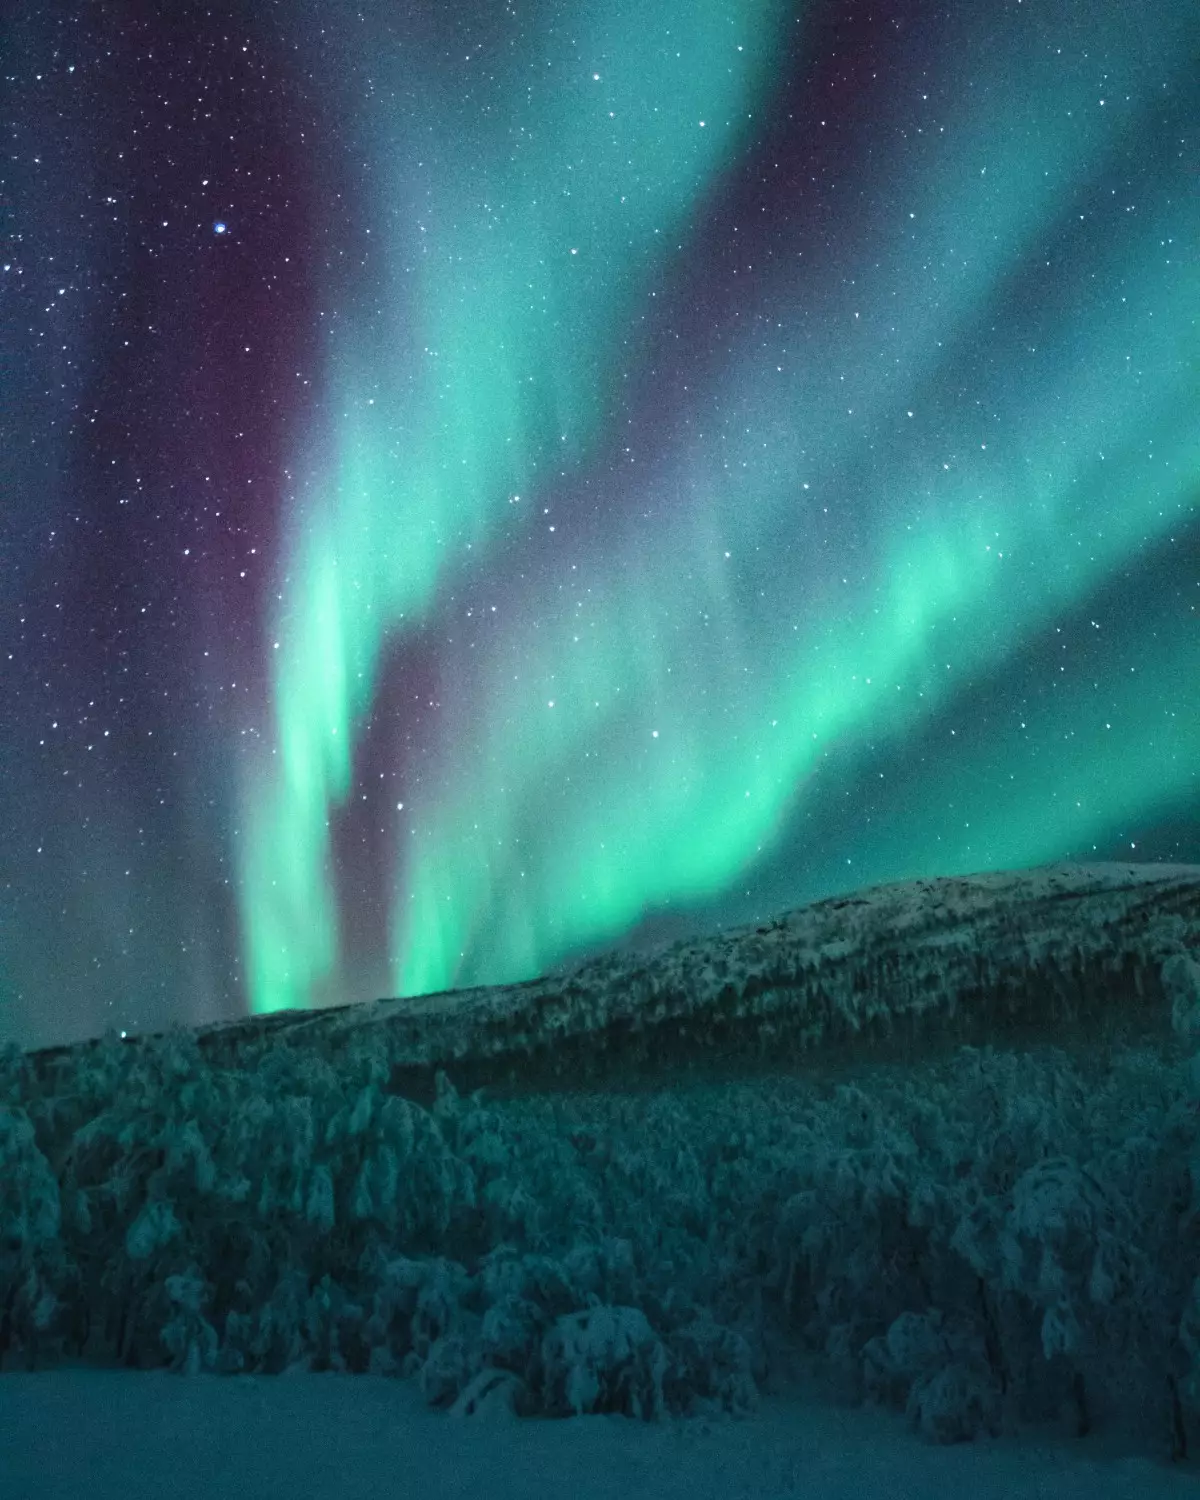 Aurora Borealis is another term for Northern Lights (